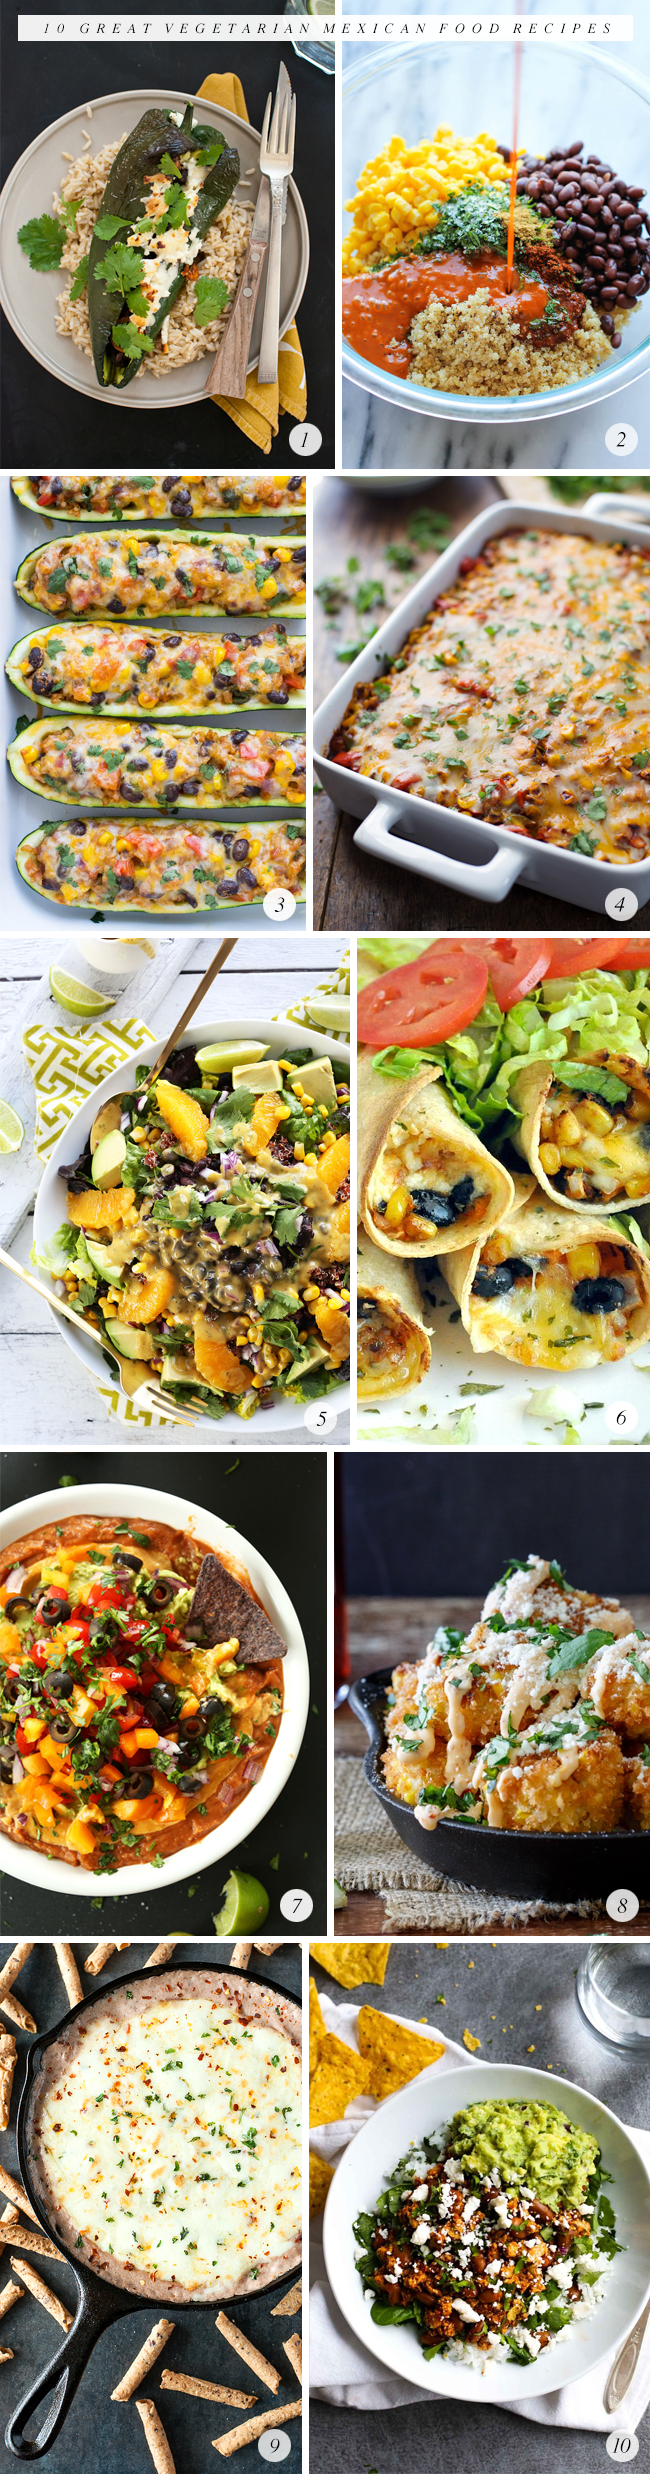 10 Great Vegetarian Mexican Food Recipes | Bubby and Bean | Bloglovin’